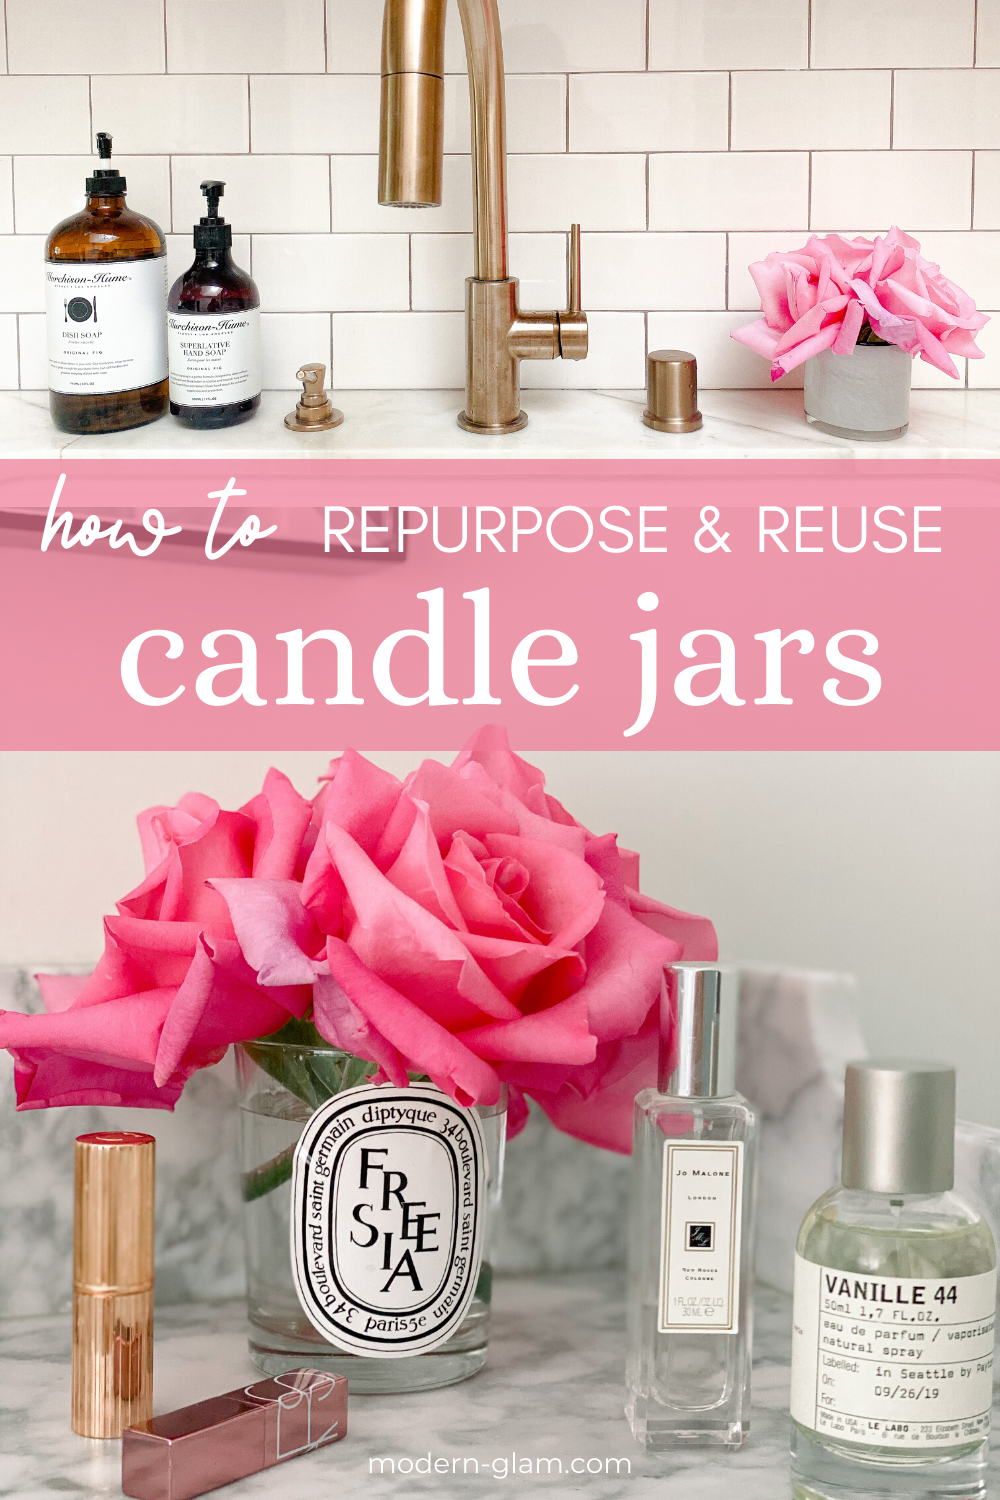 Learn the easiest way to clean out those old candle jars. Plus 3 beautiful ways you can repurpose them and decorate your home! #reduce #reuse #repurpose #diy #modernglam via @modernglamhome